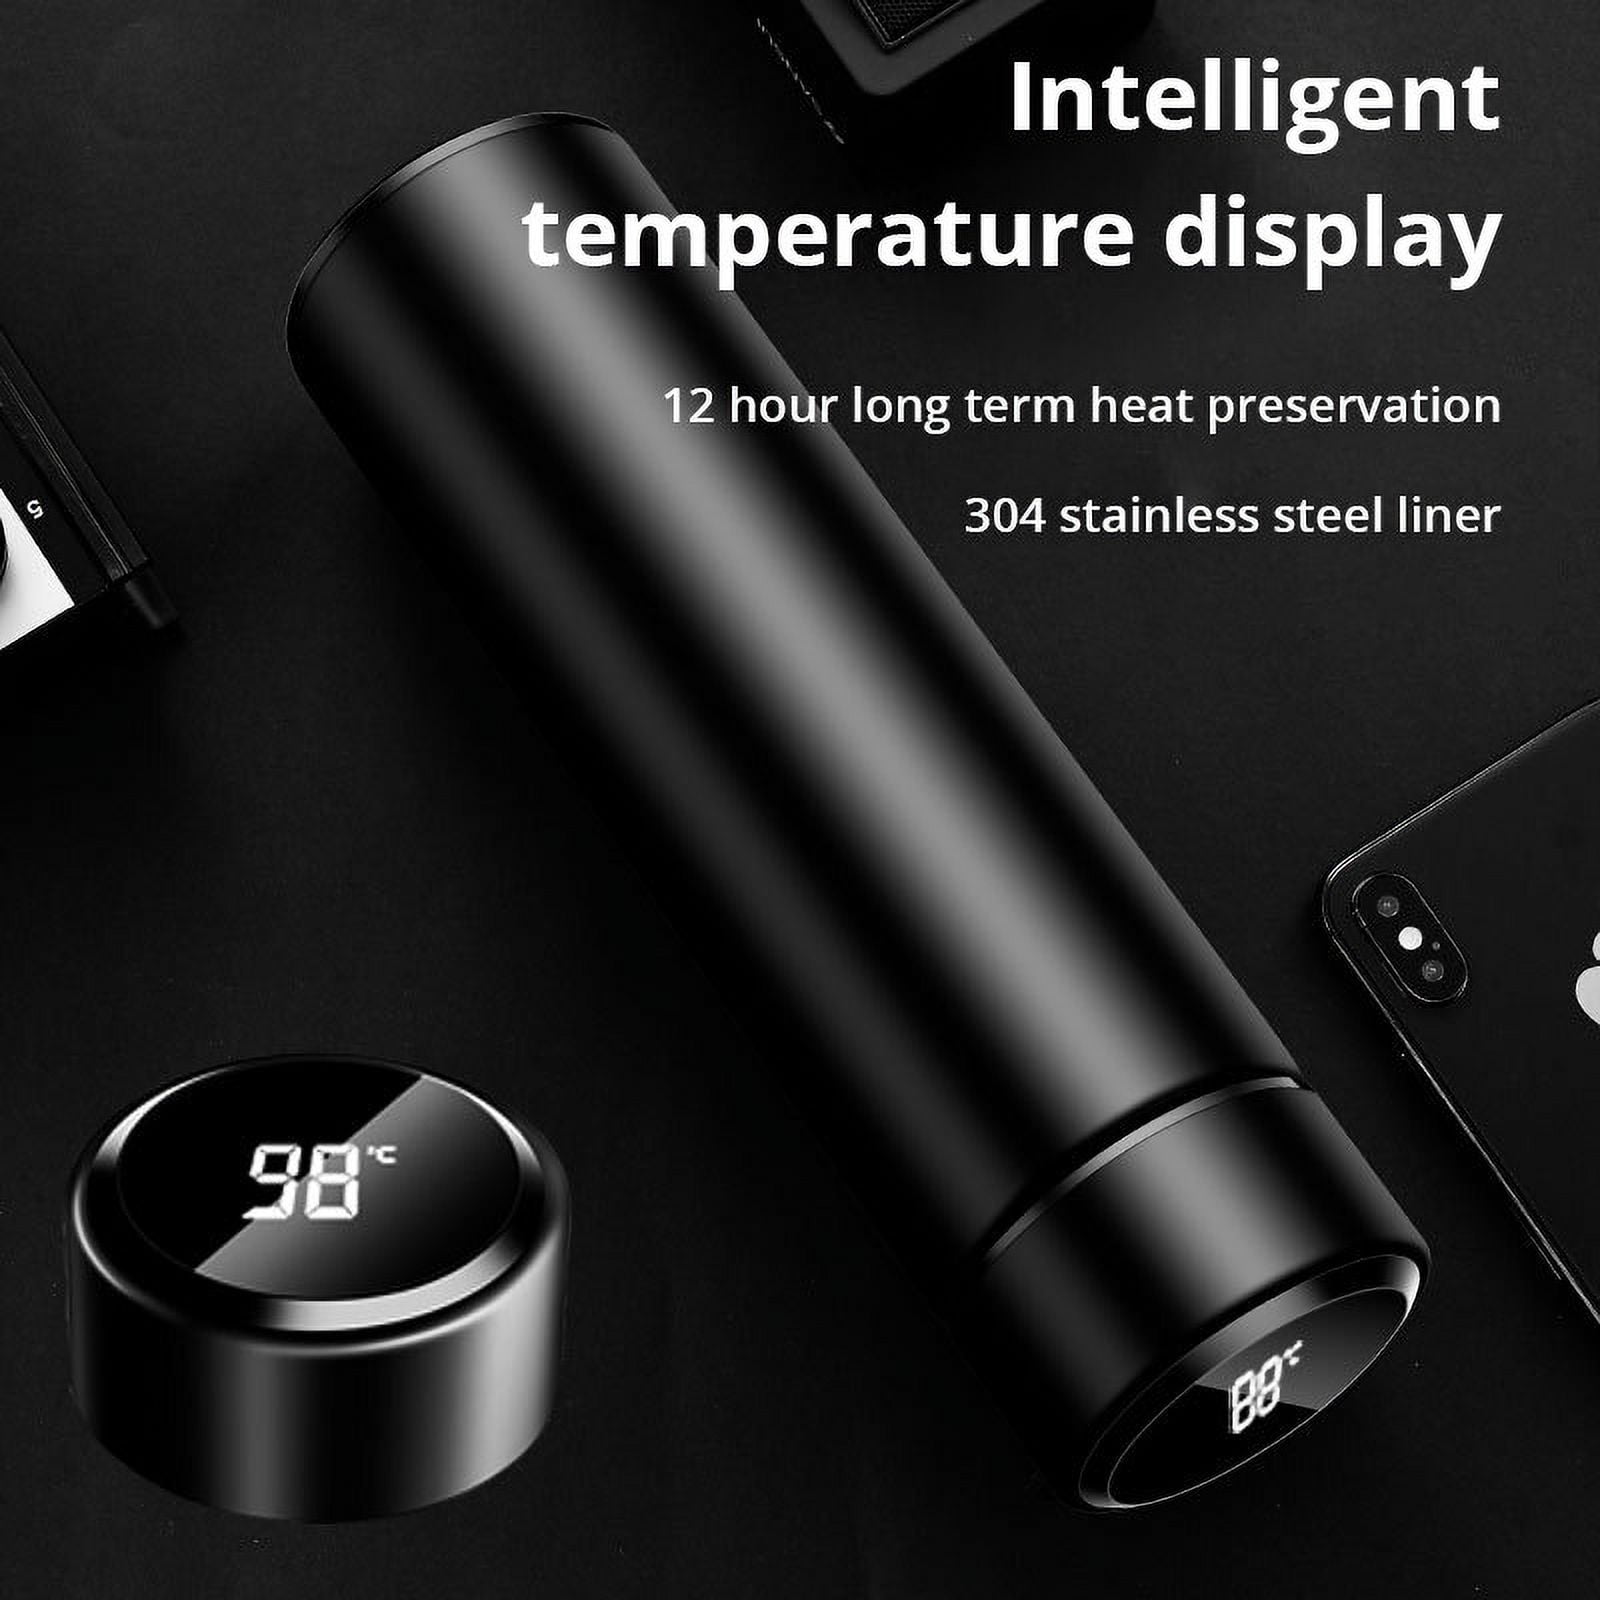 Creativity Sublimation Blanks Tumbler Water Bottle 500ml Stainless Steel  Straight Vacuum Flask Coffee Mug With LED Touch Display Temperature Gift  From Royalmart, $7.64